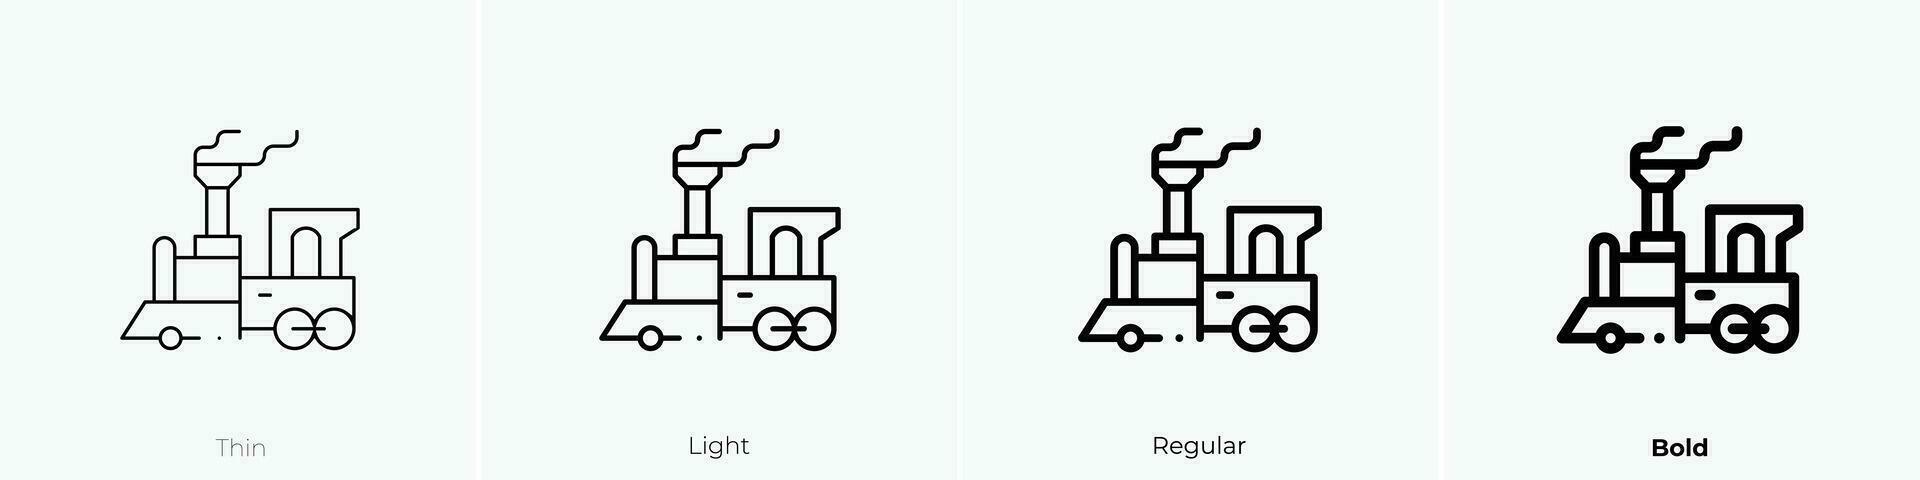 train icon. Thin, Light, Regular And Bold style design isolated on white background vector